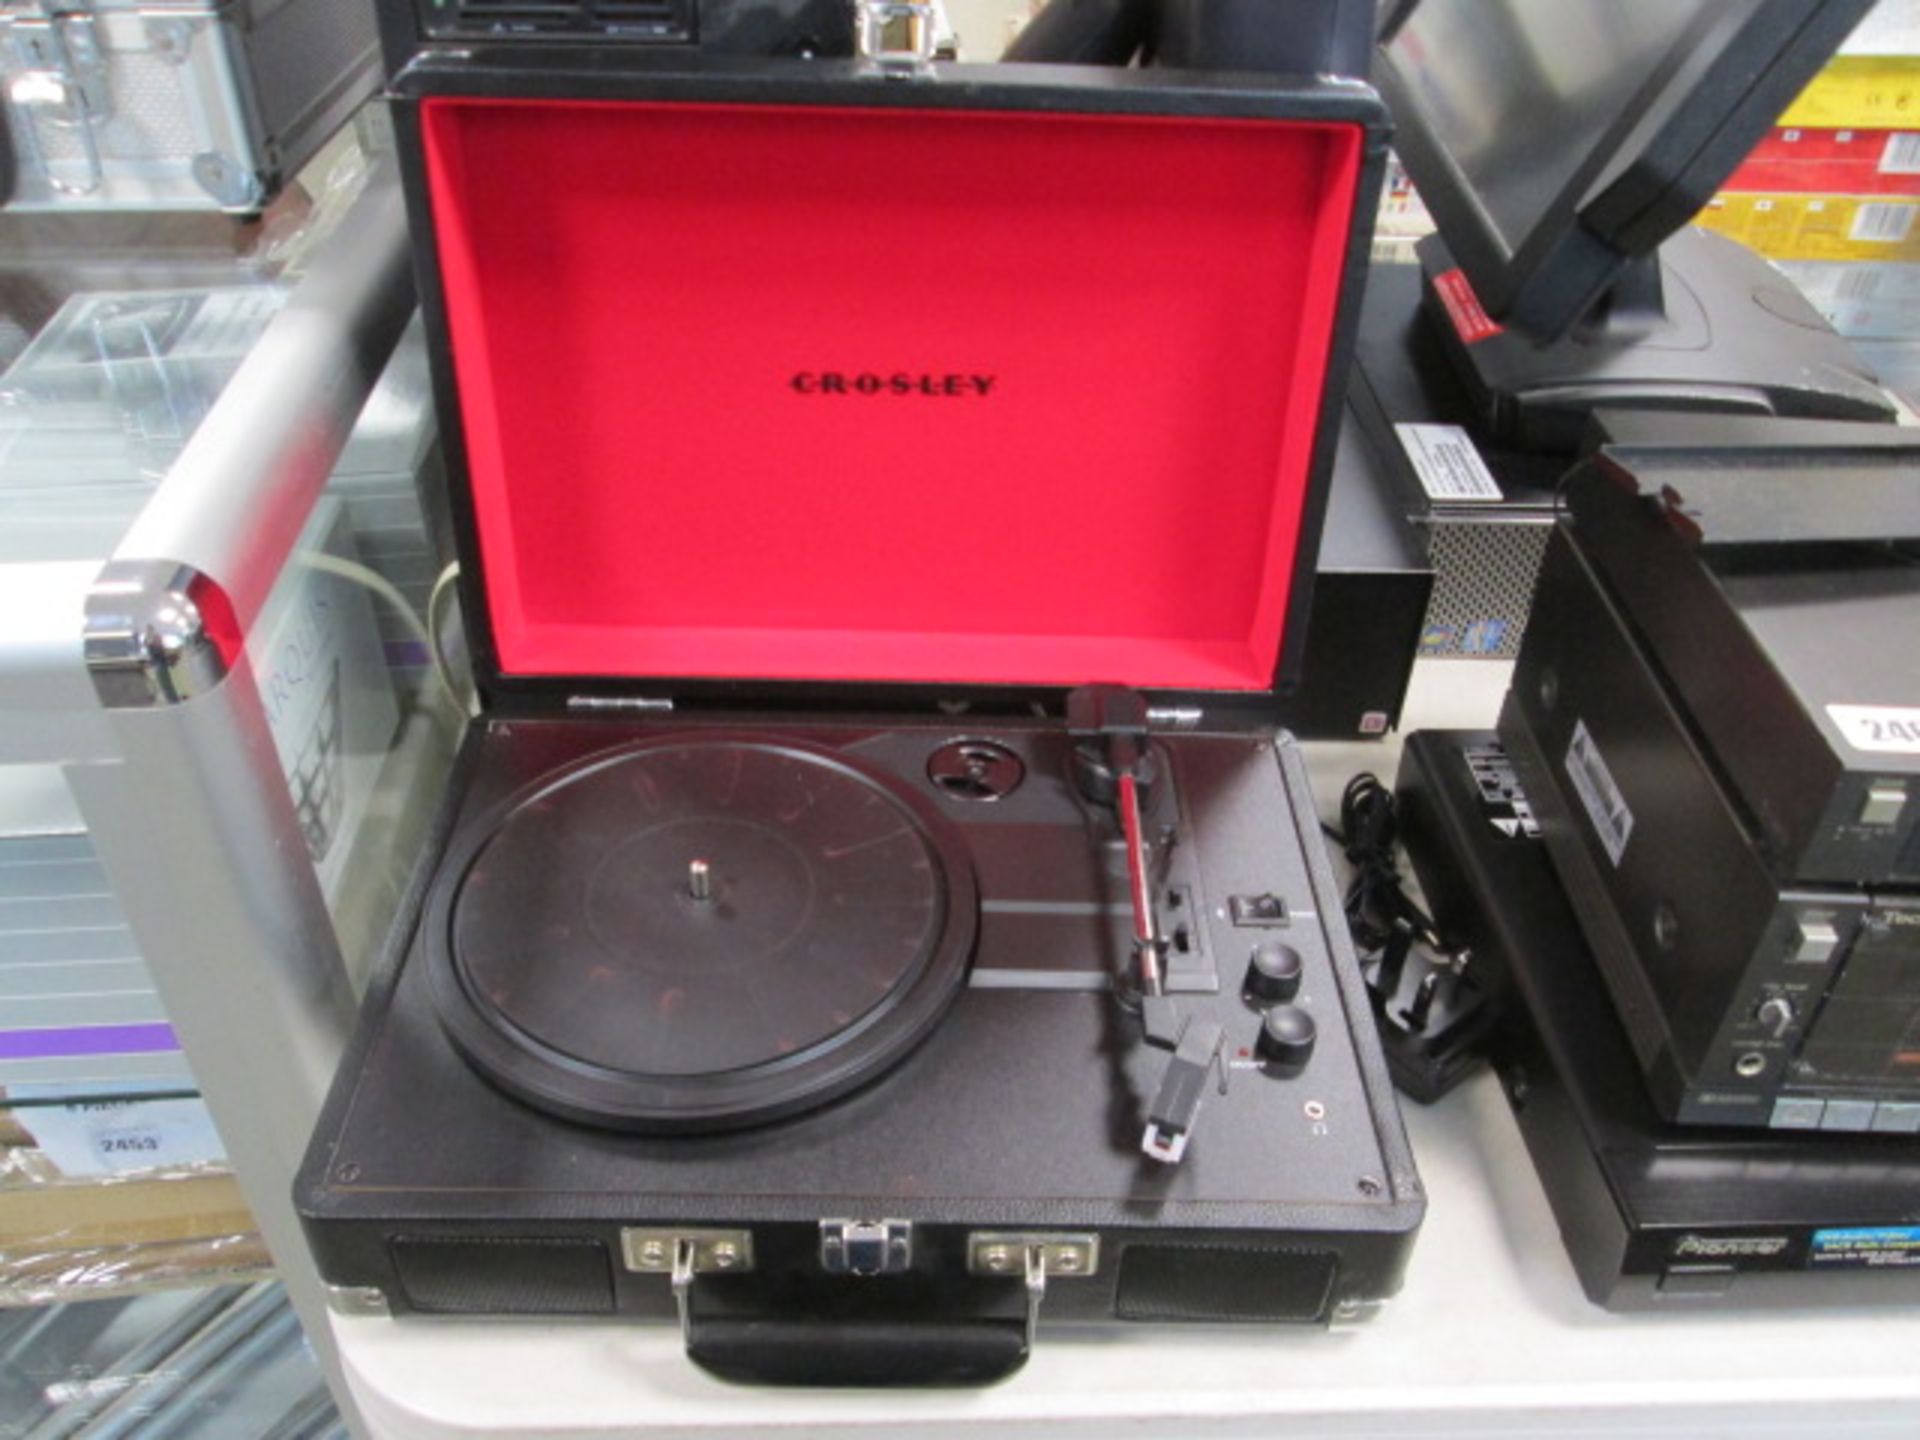 Crosley portable turntable with power supply unit